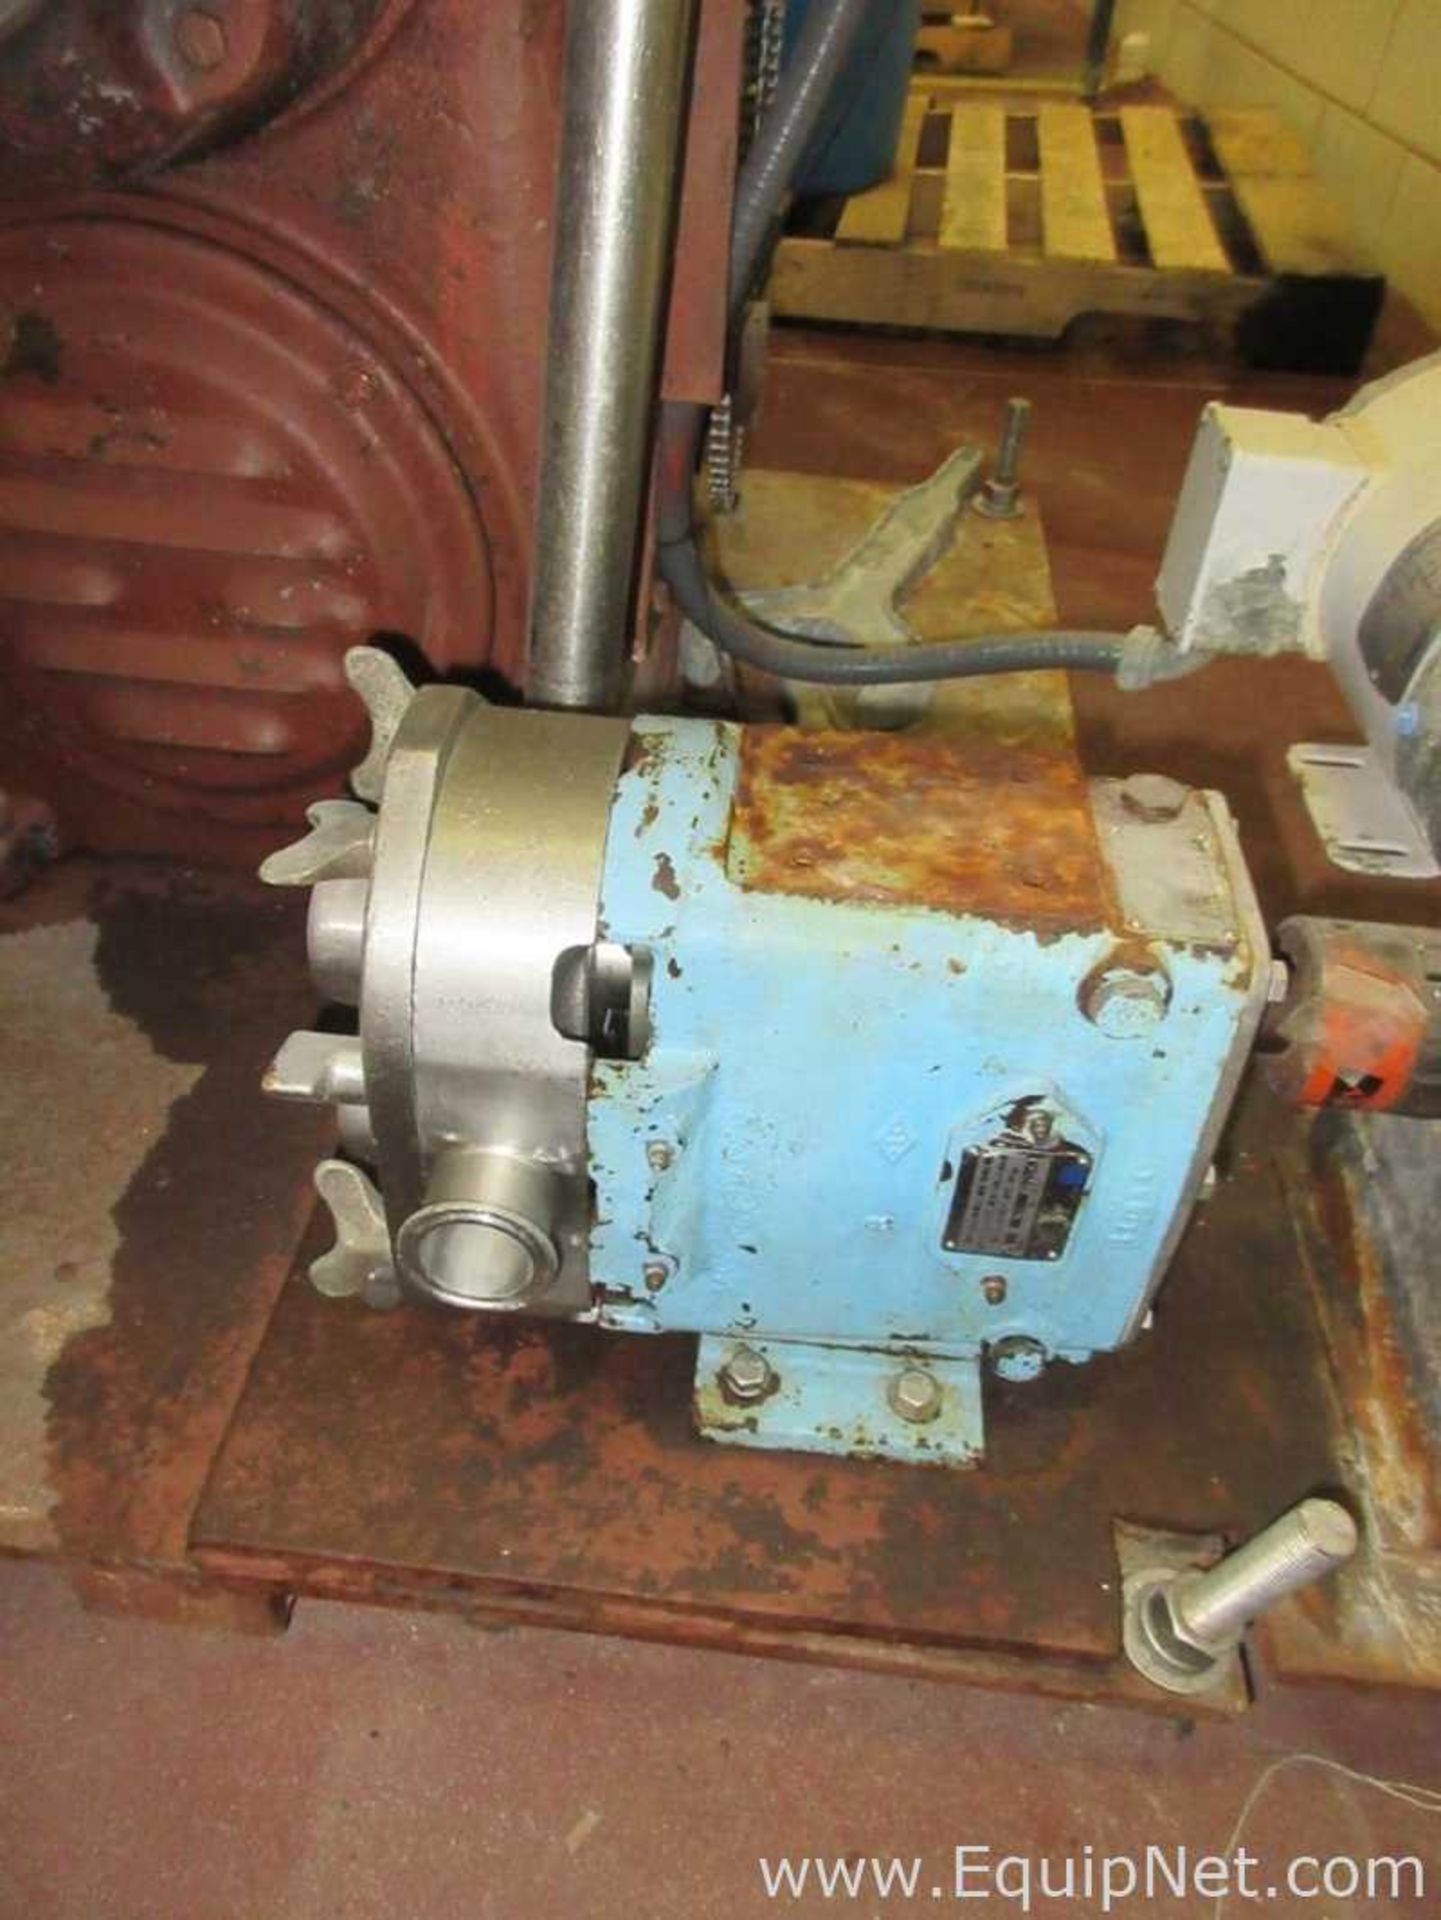 Whipper And Waukesha Positive Displacement Pump - Image 8 of 12